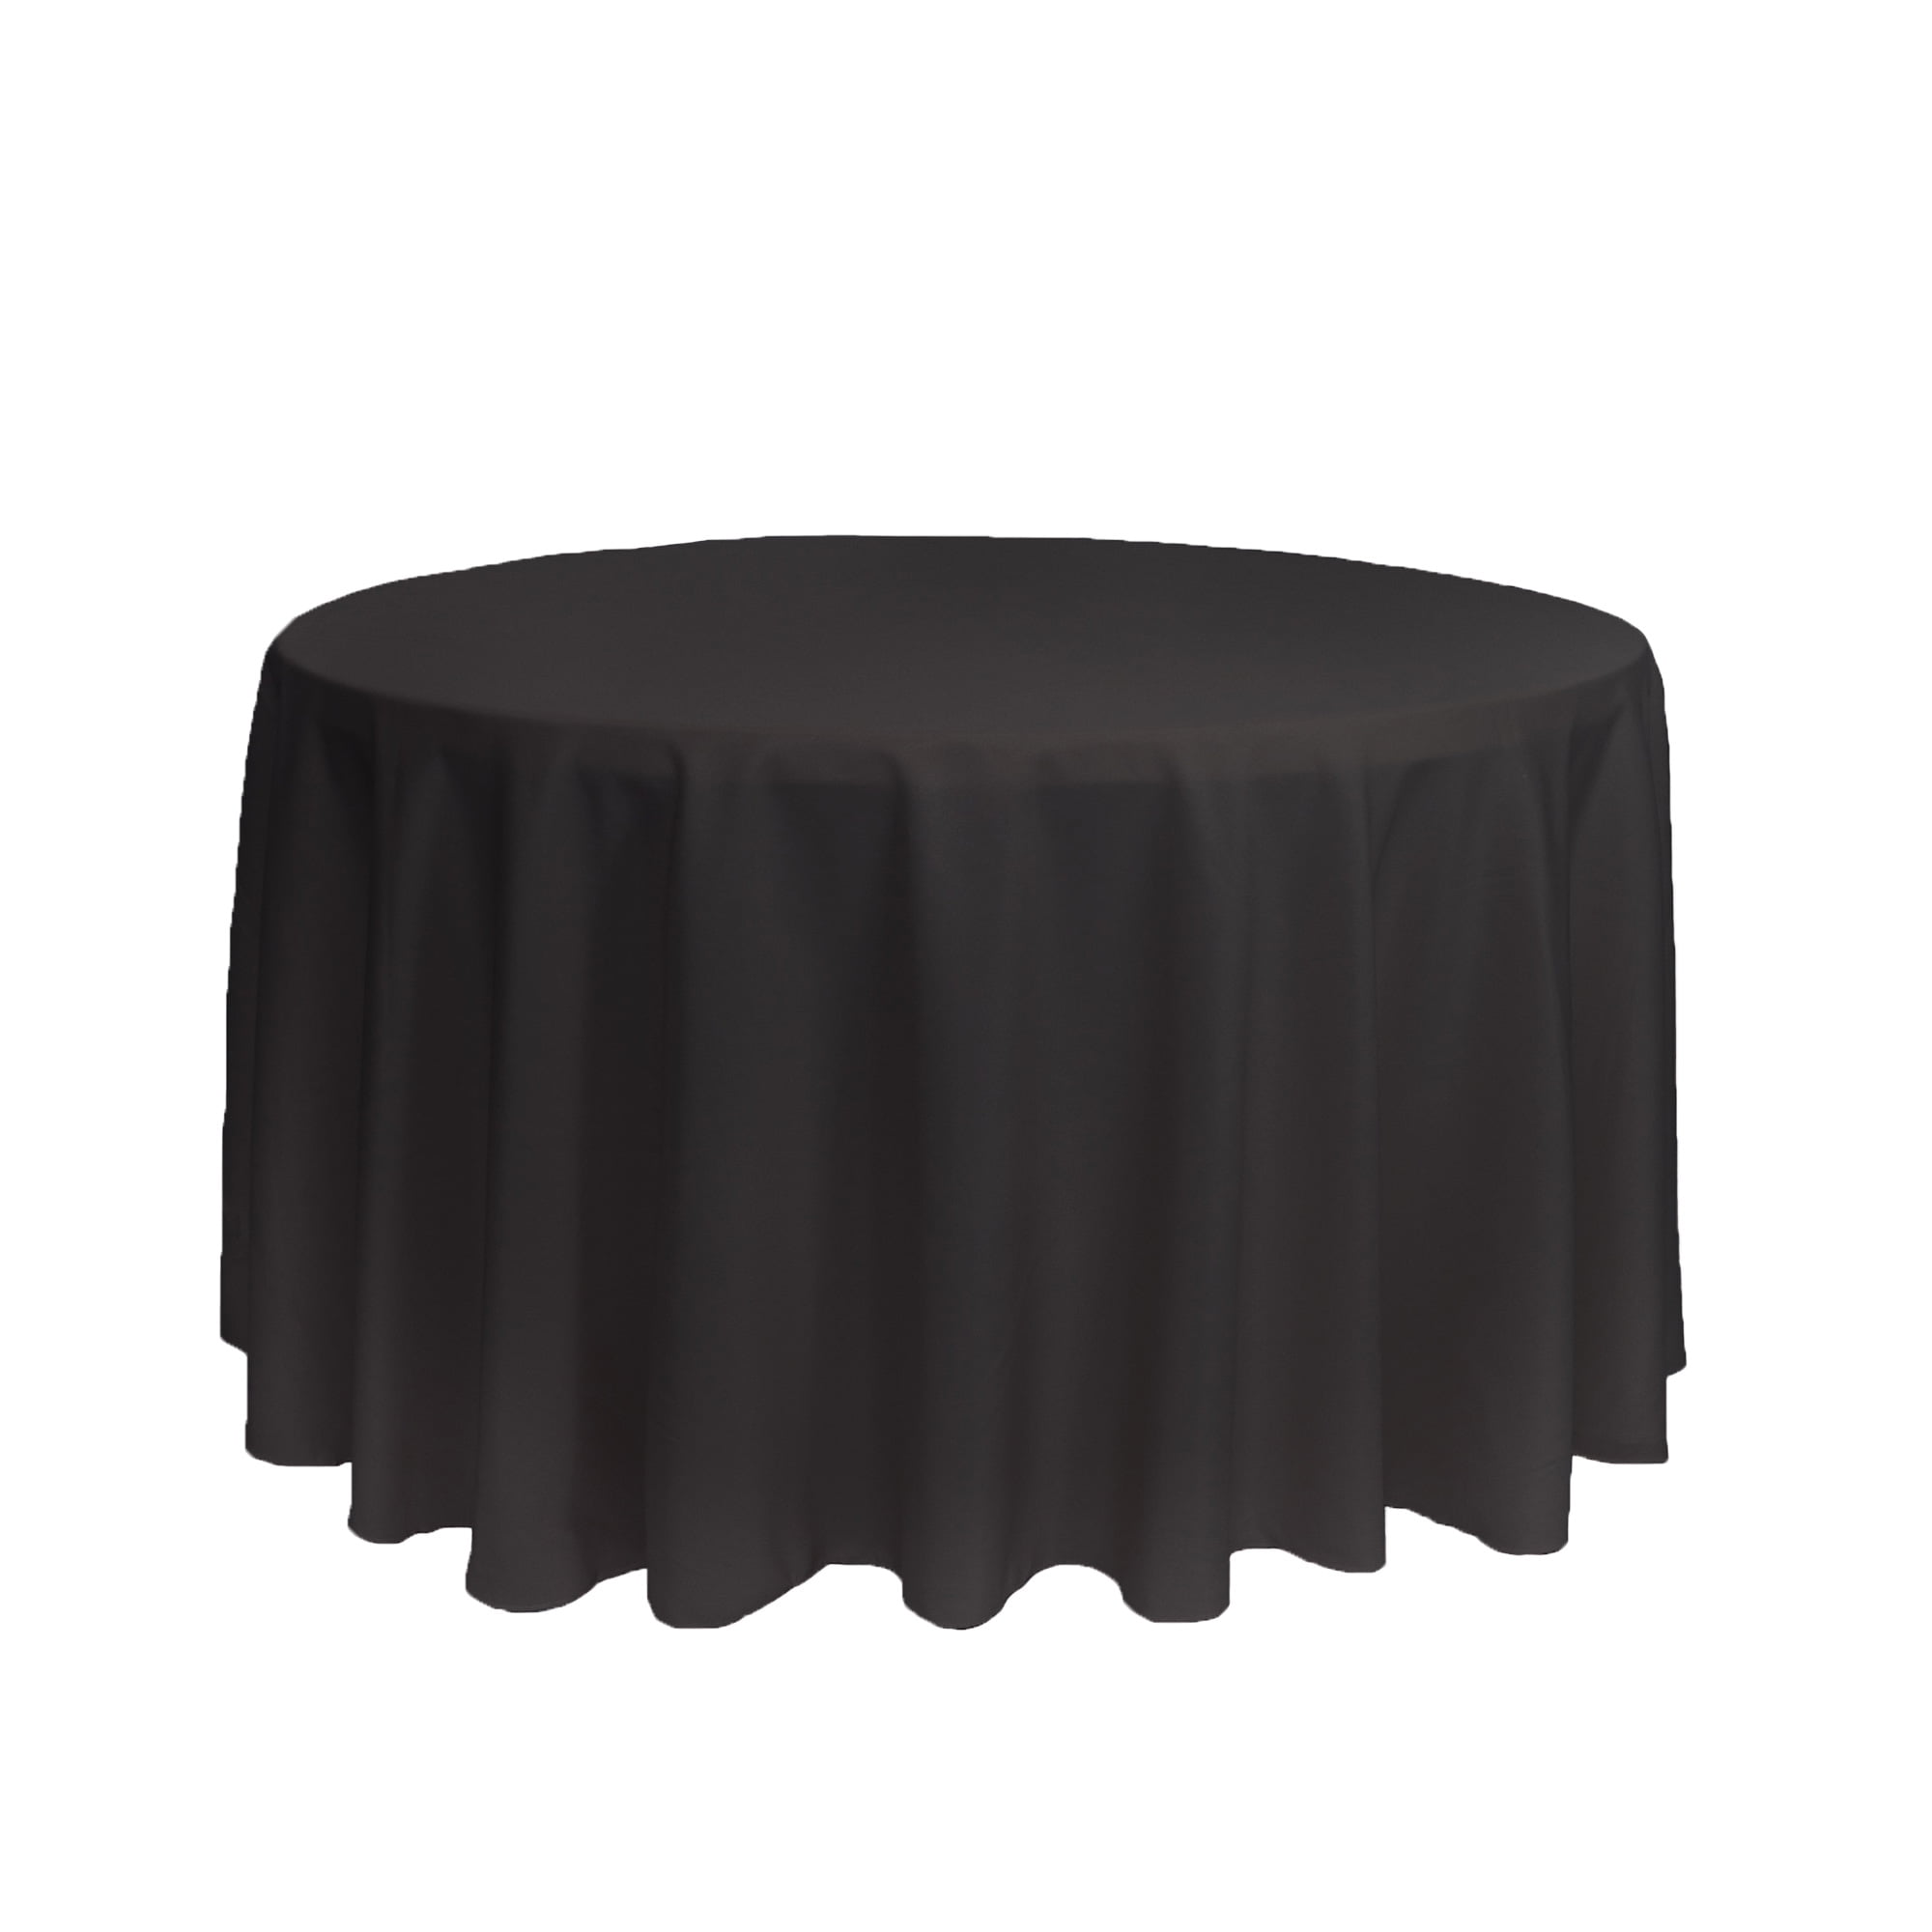 LinenTablecloth 108 in 33 Colors! Round Polyester Tablecloths 